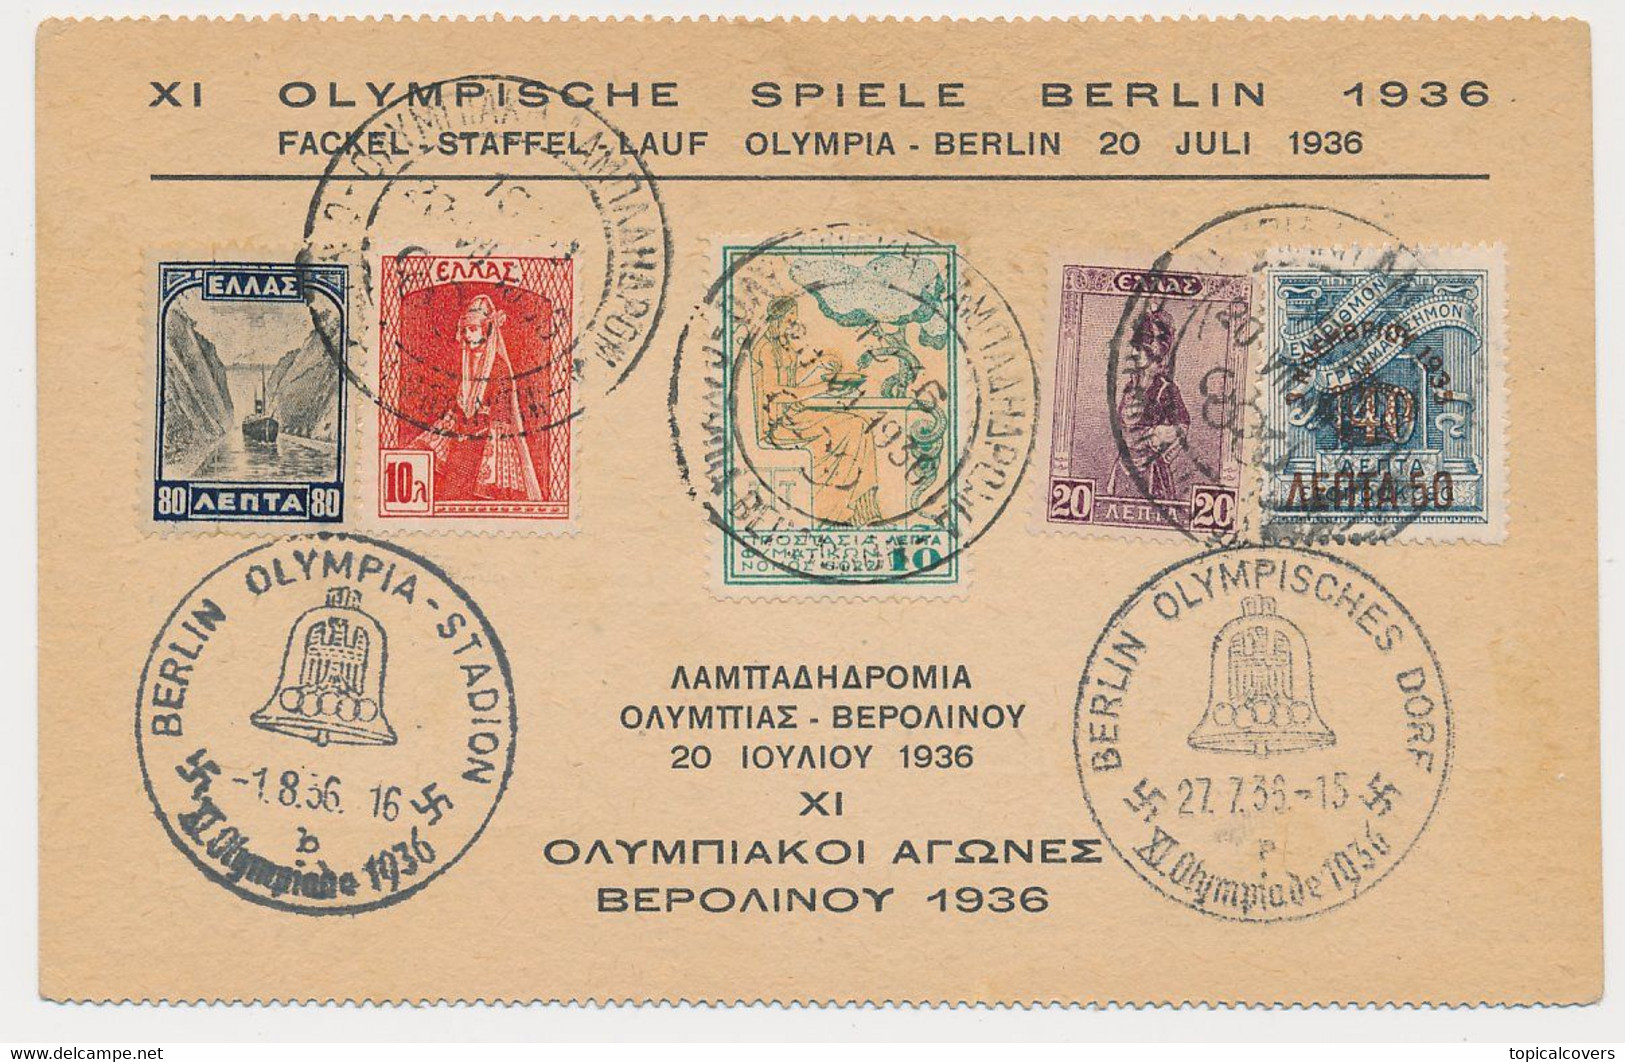 Postcard / Stamps / Postmark Torch Relay  Olympic Games Berlin 1936 - Olympia Greece - Berlin Germany - Sommer 1936: Berlin